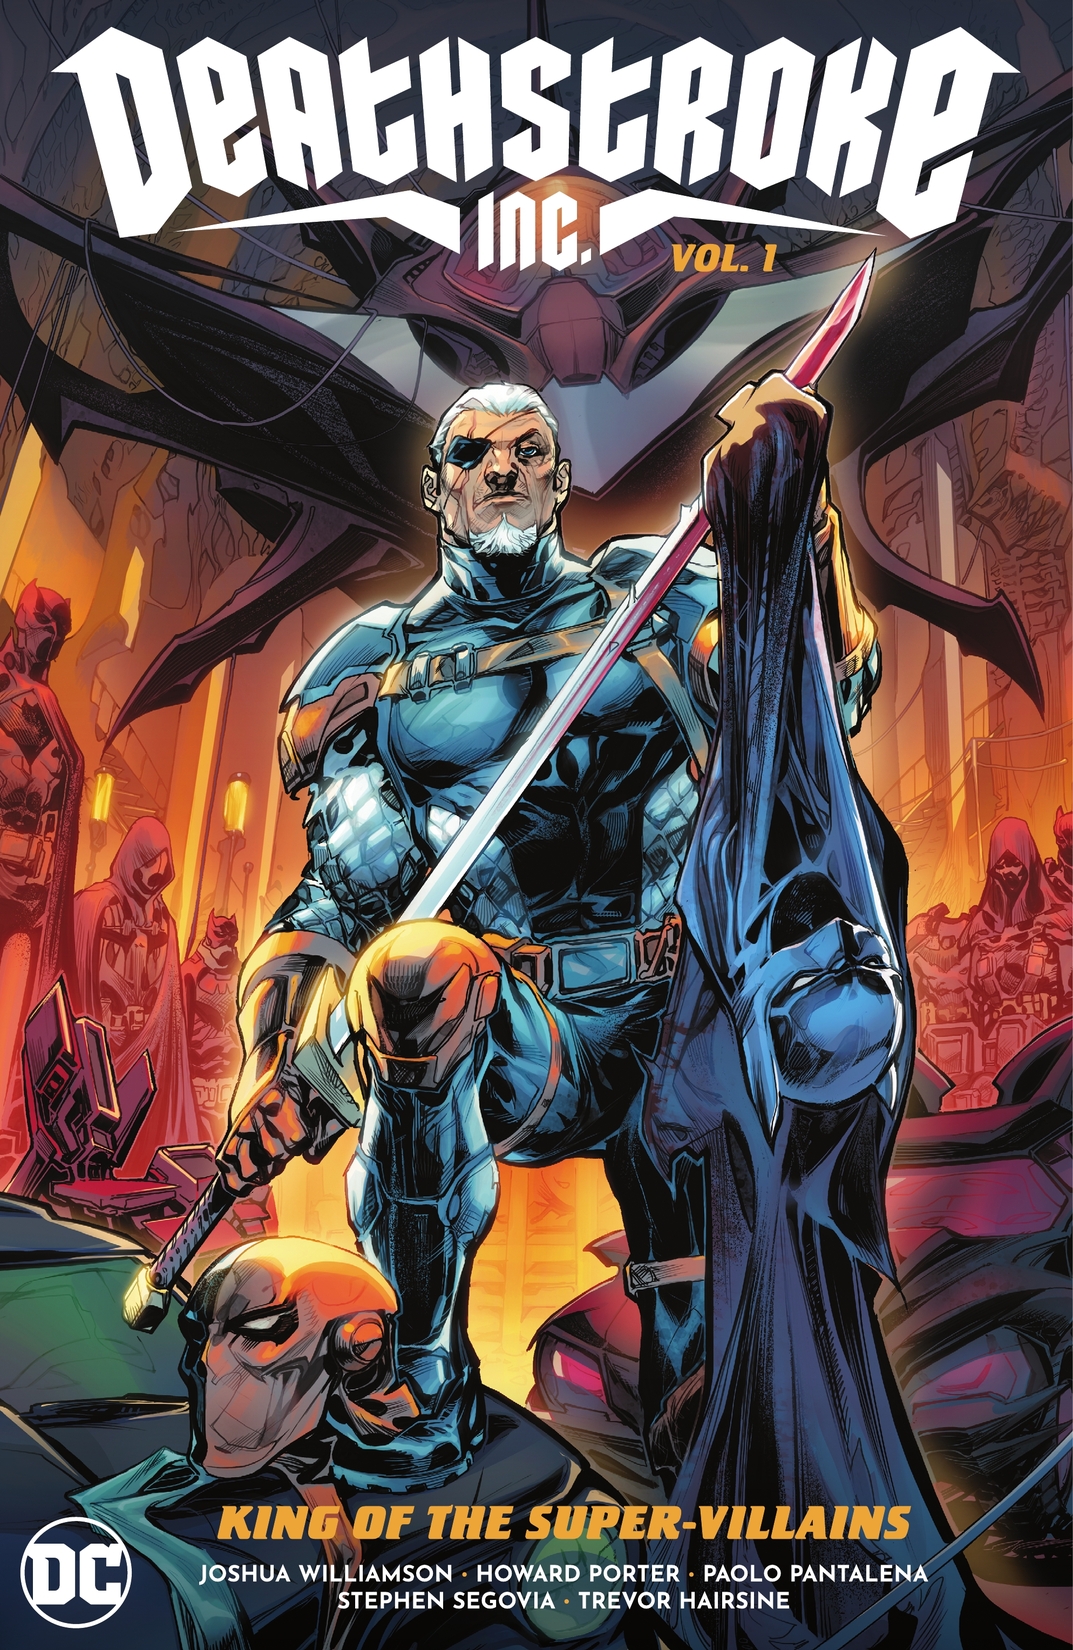 Deathstroke Inc. Vol. 1: King of the Super-Villains preview images